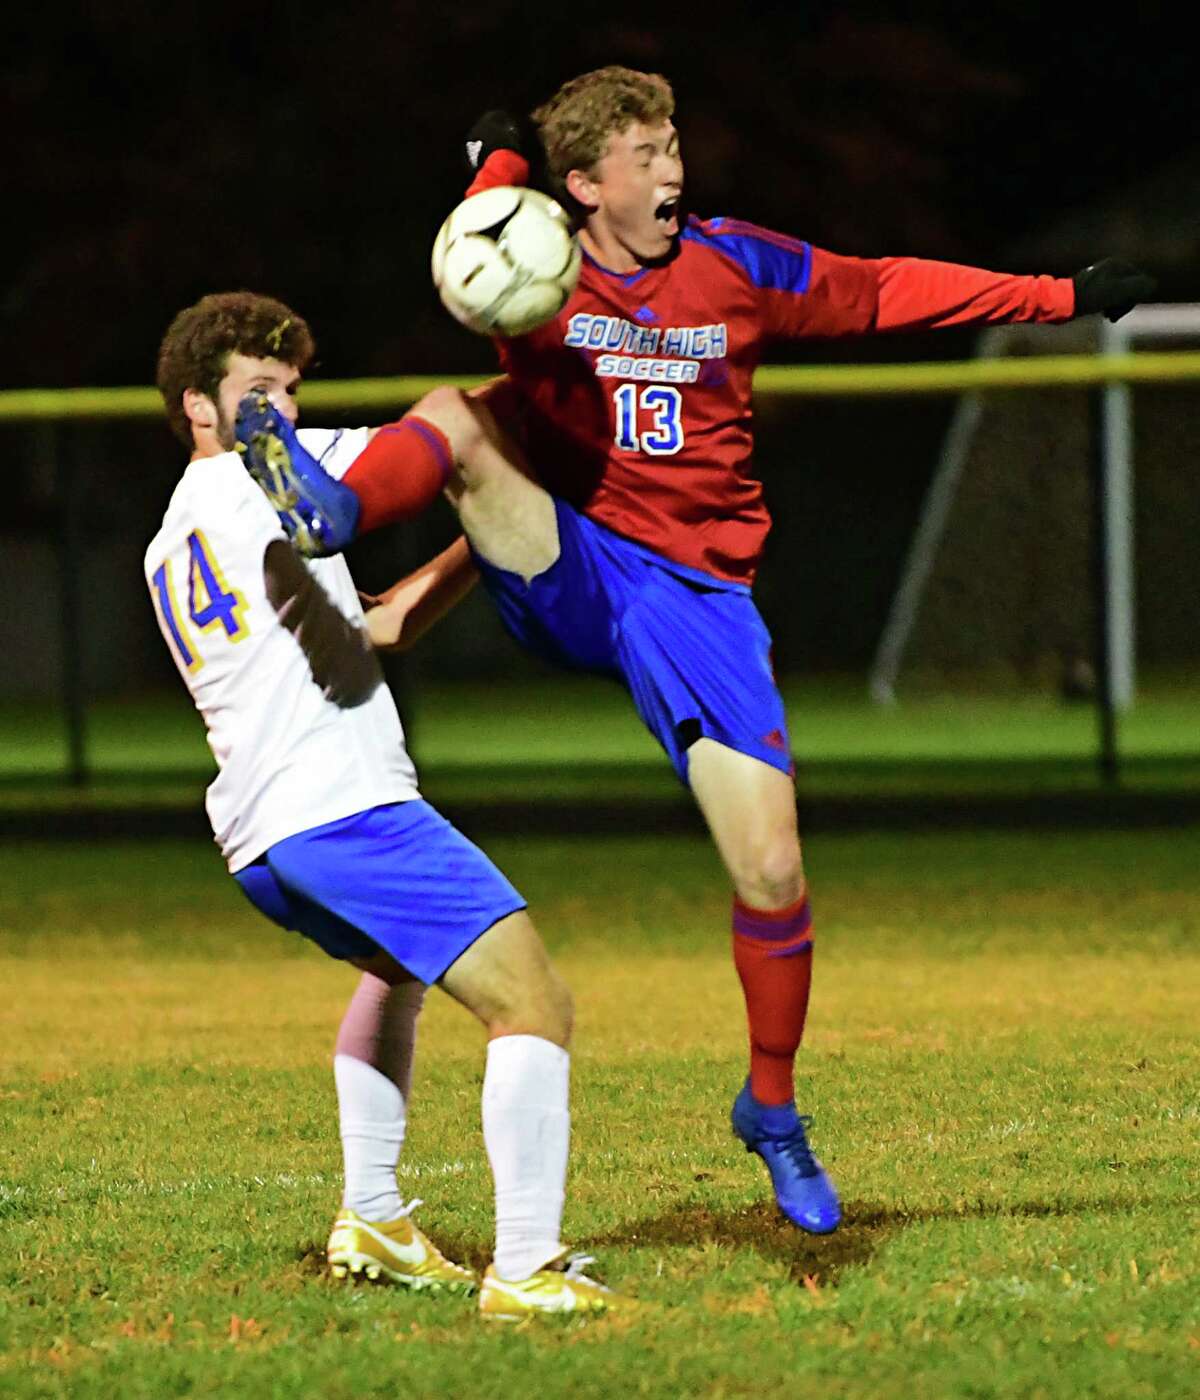 Queensbury's Lucas McCane, left, battles for the ball with South Glens Falls' Andrew King during a soccer game on Wednesday, Oct. 2, 2019. This school year's season has been pushed to spring. (Lori Van Buren/Times Union)